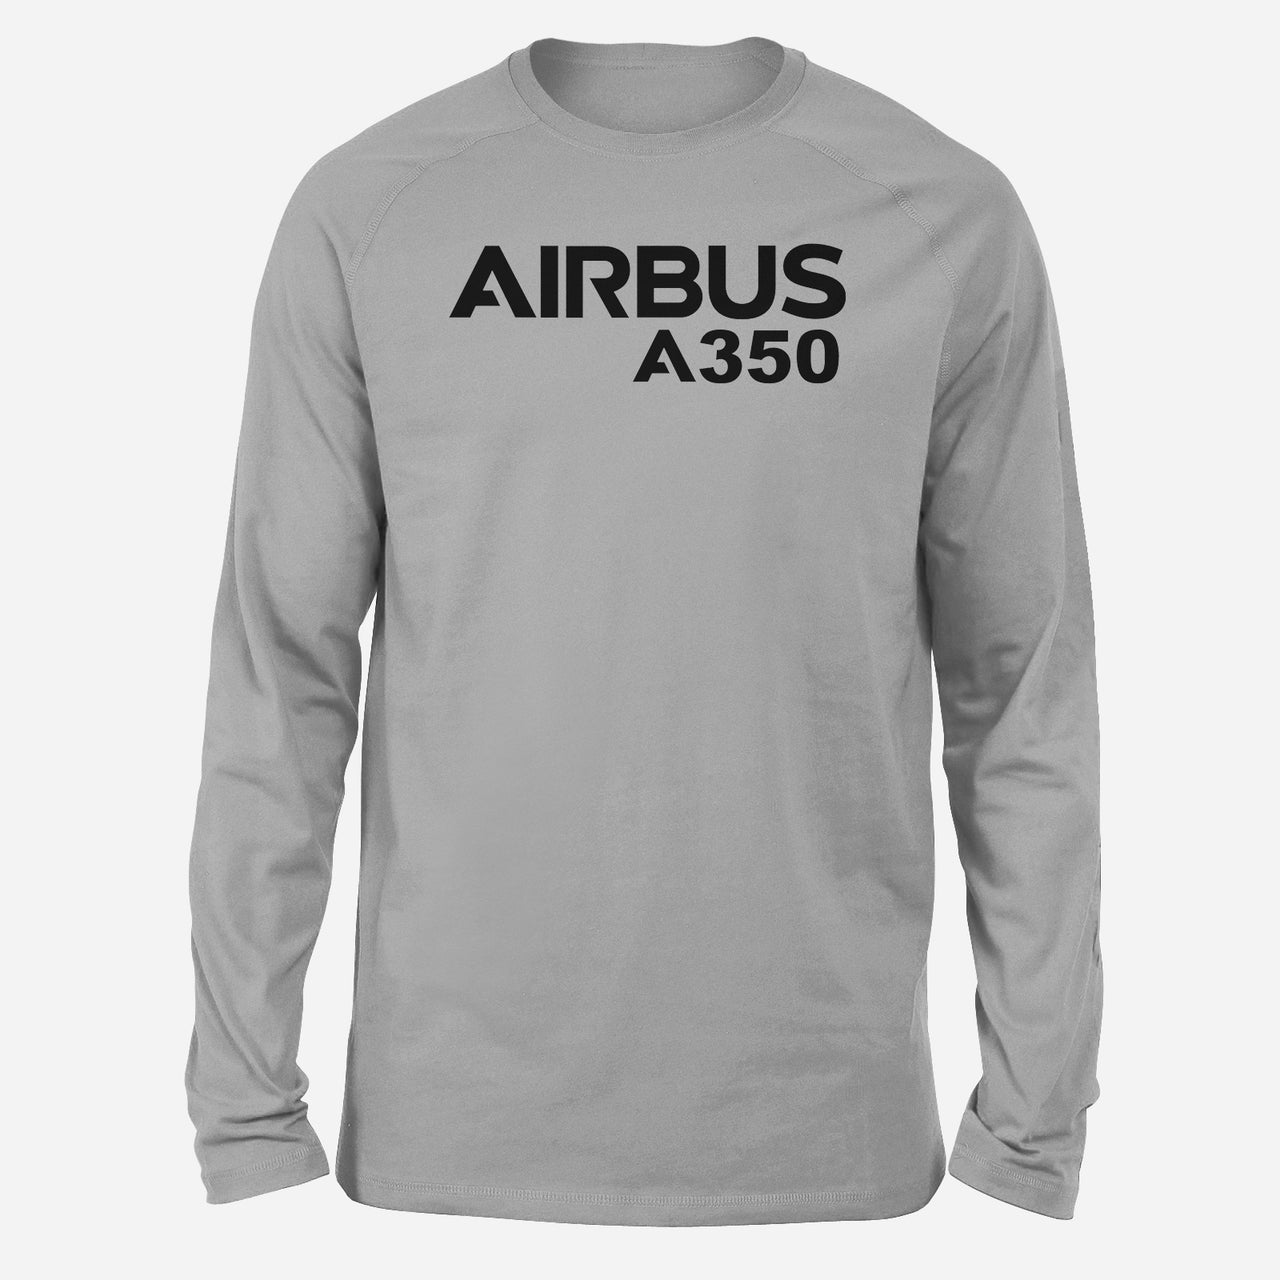 Airbus A350 & Text Designed Long-Sleeve T-Shirts